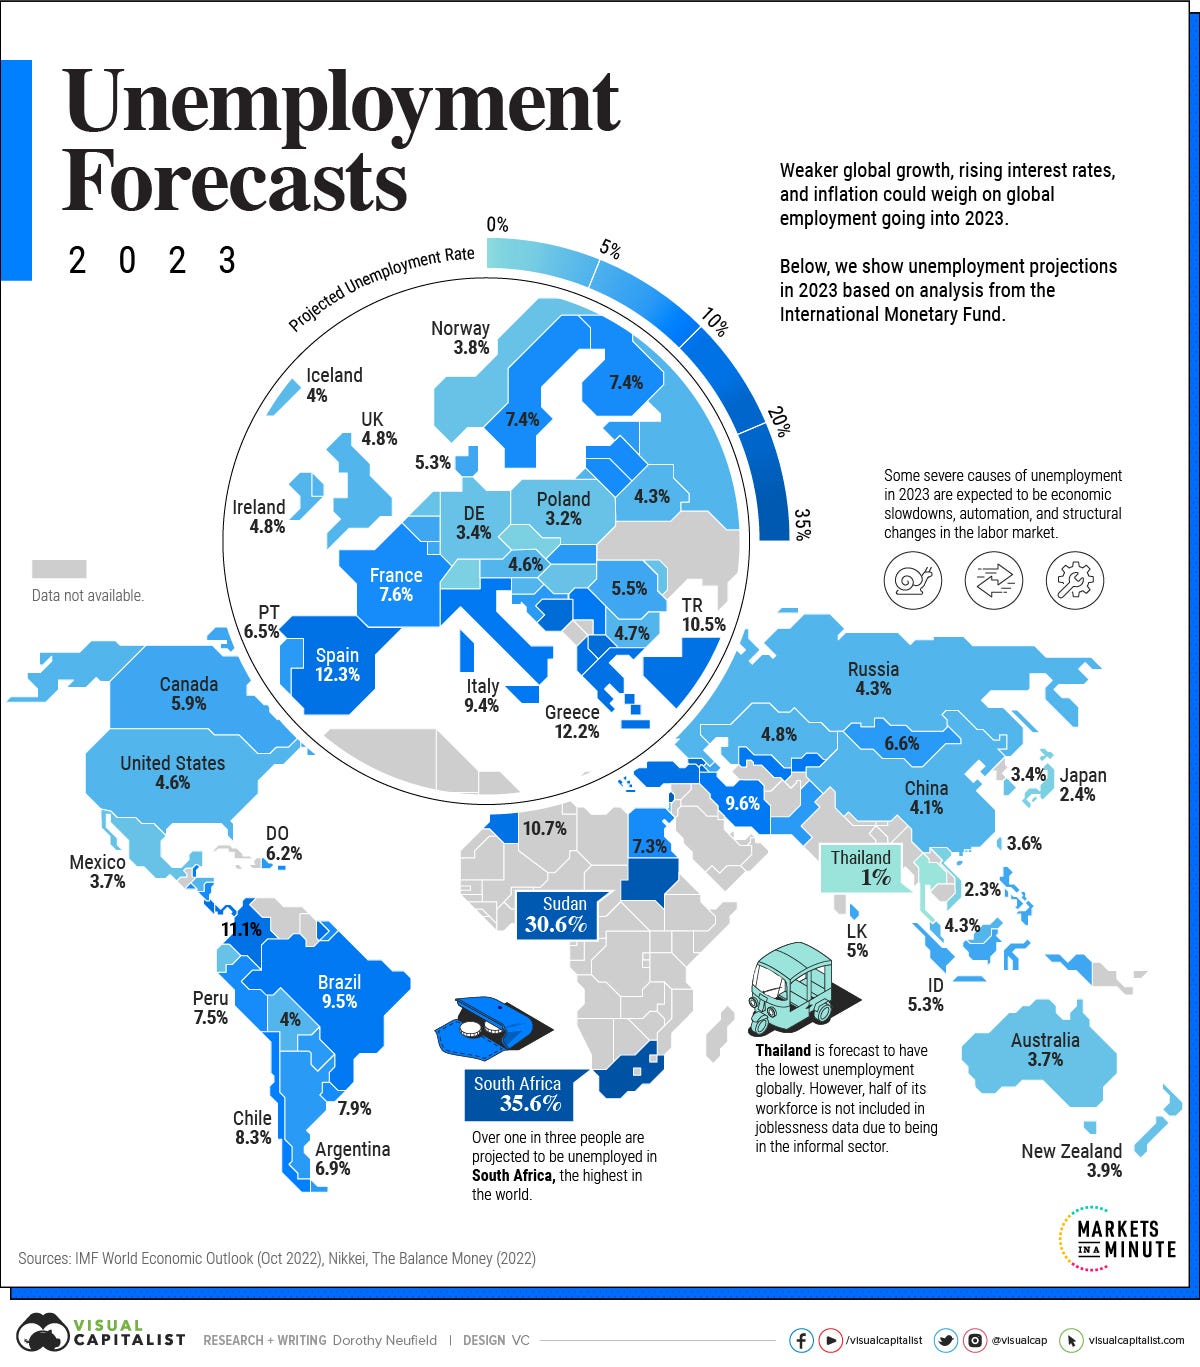 Unemployment Forecasts for 2023